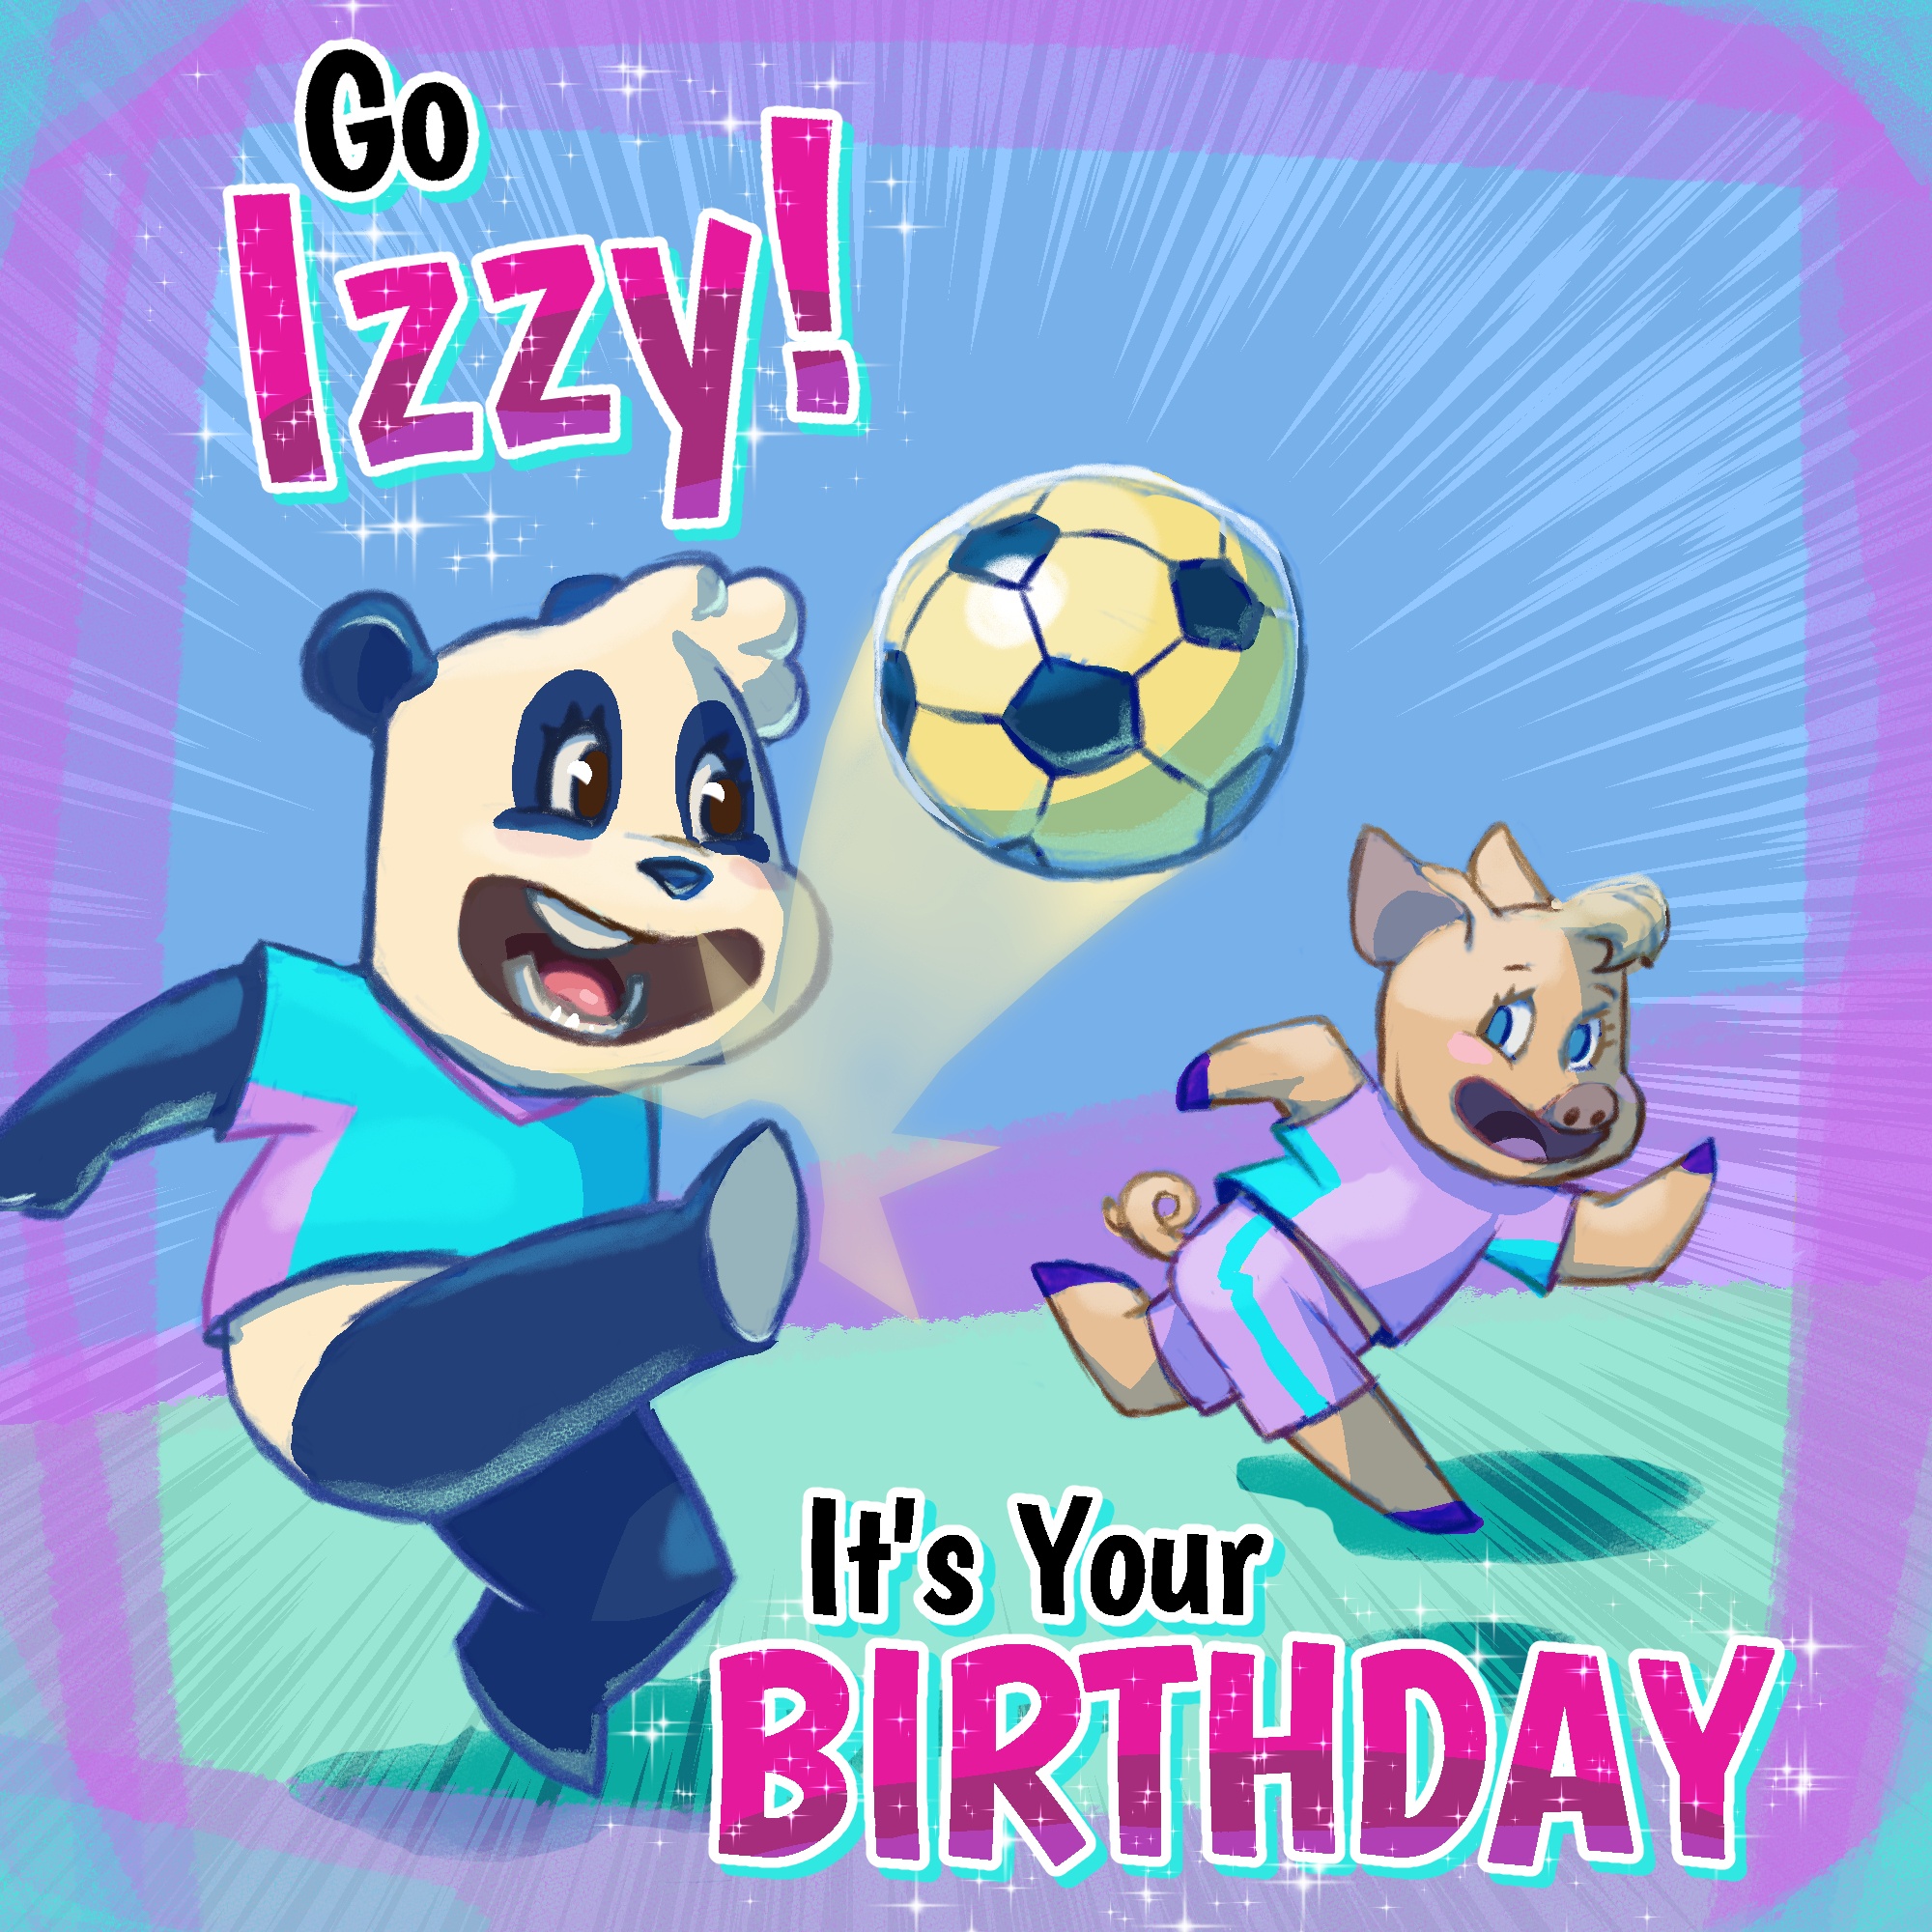 Professional Illustration for Children's Books, Games, and Education - Izzy BDay